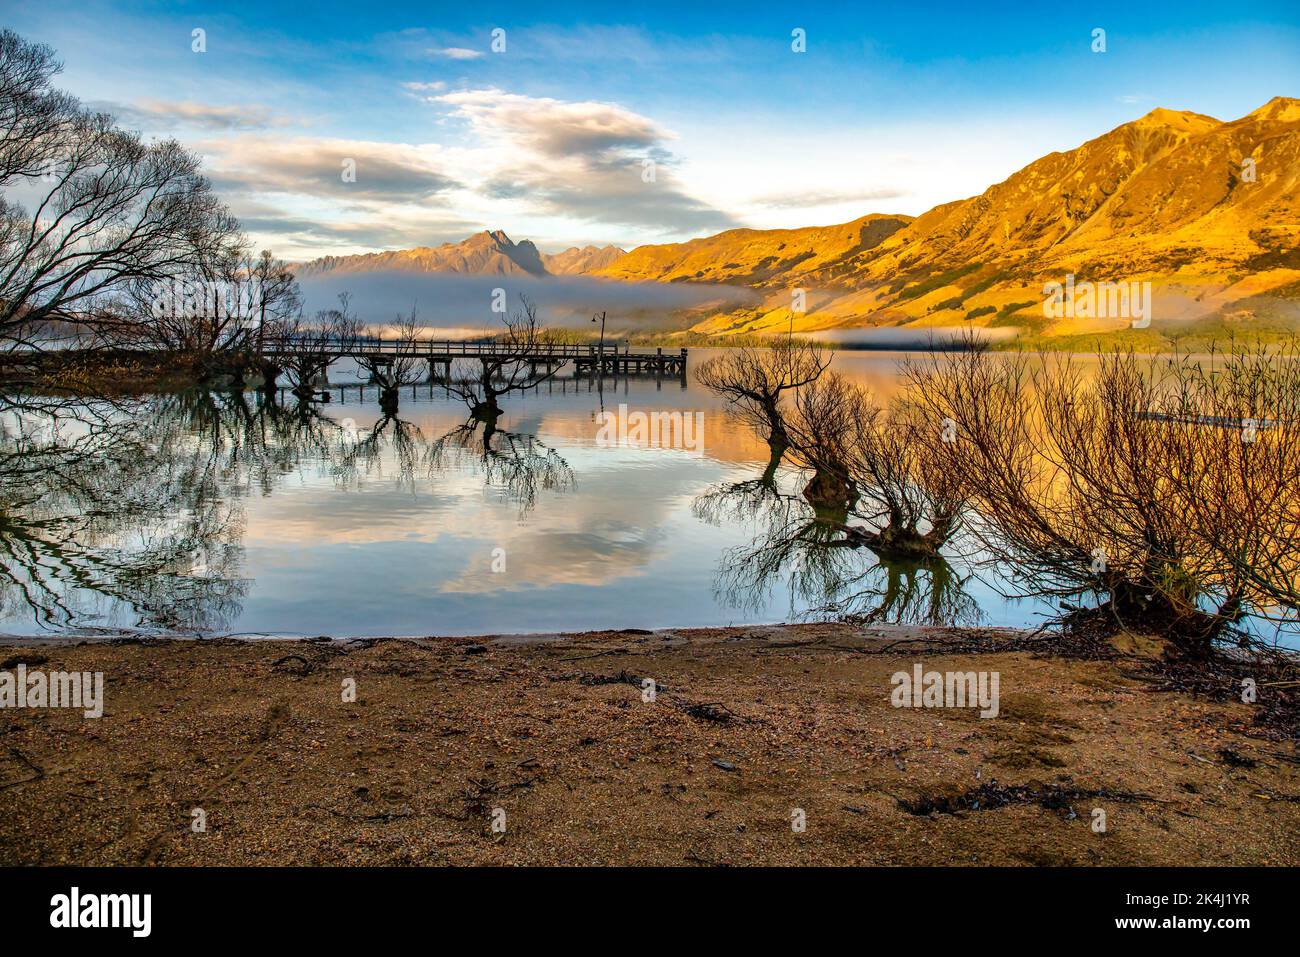 Glenorchy at sunrise as the early morning golden sun warms the mountains and the mountains and willow trees are reflected on Lake Wakatipu Stock Photo